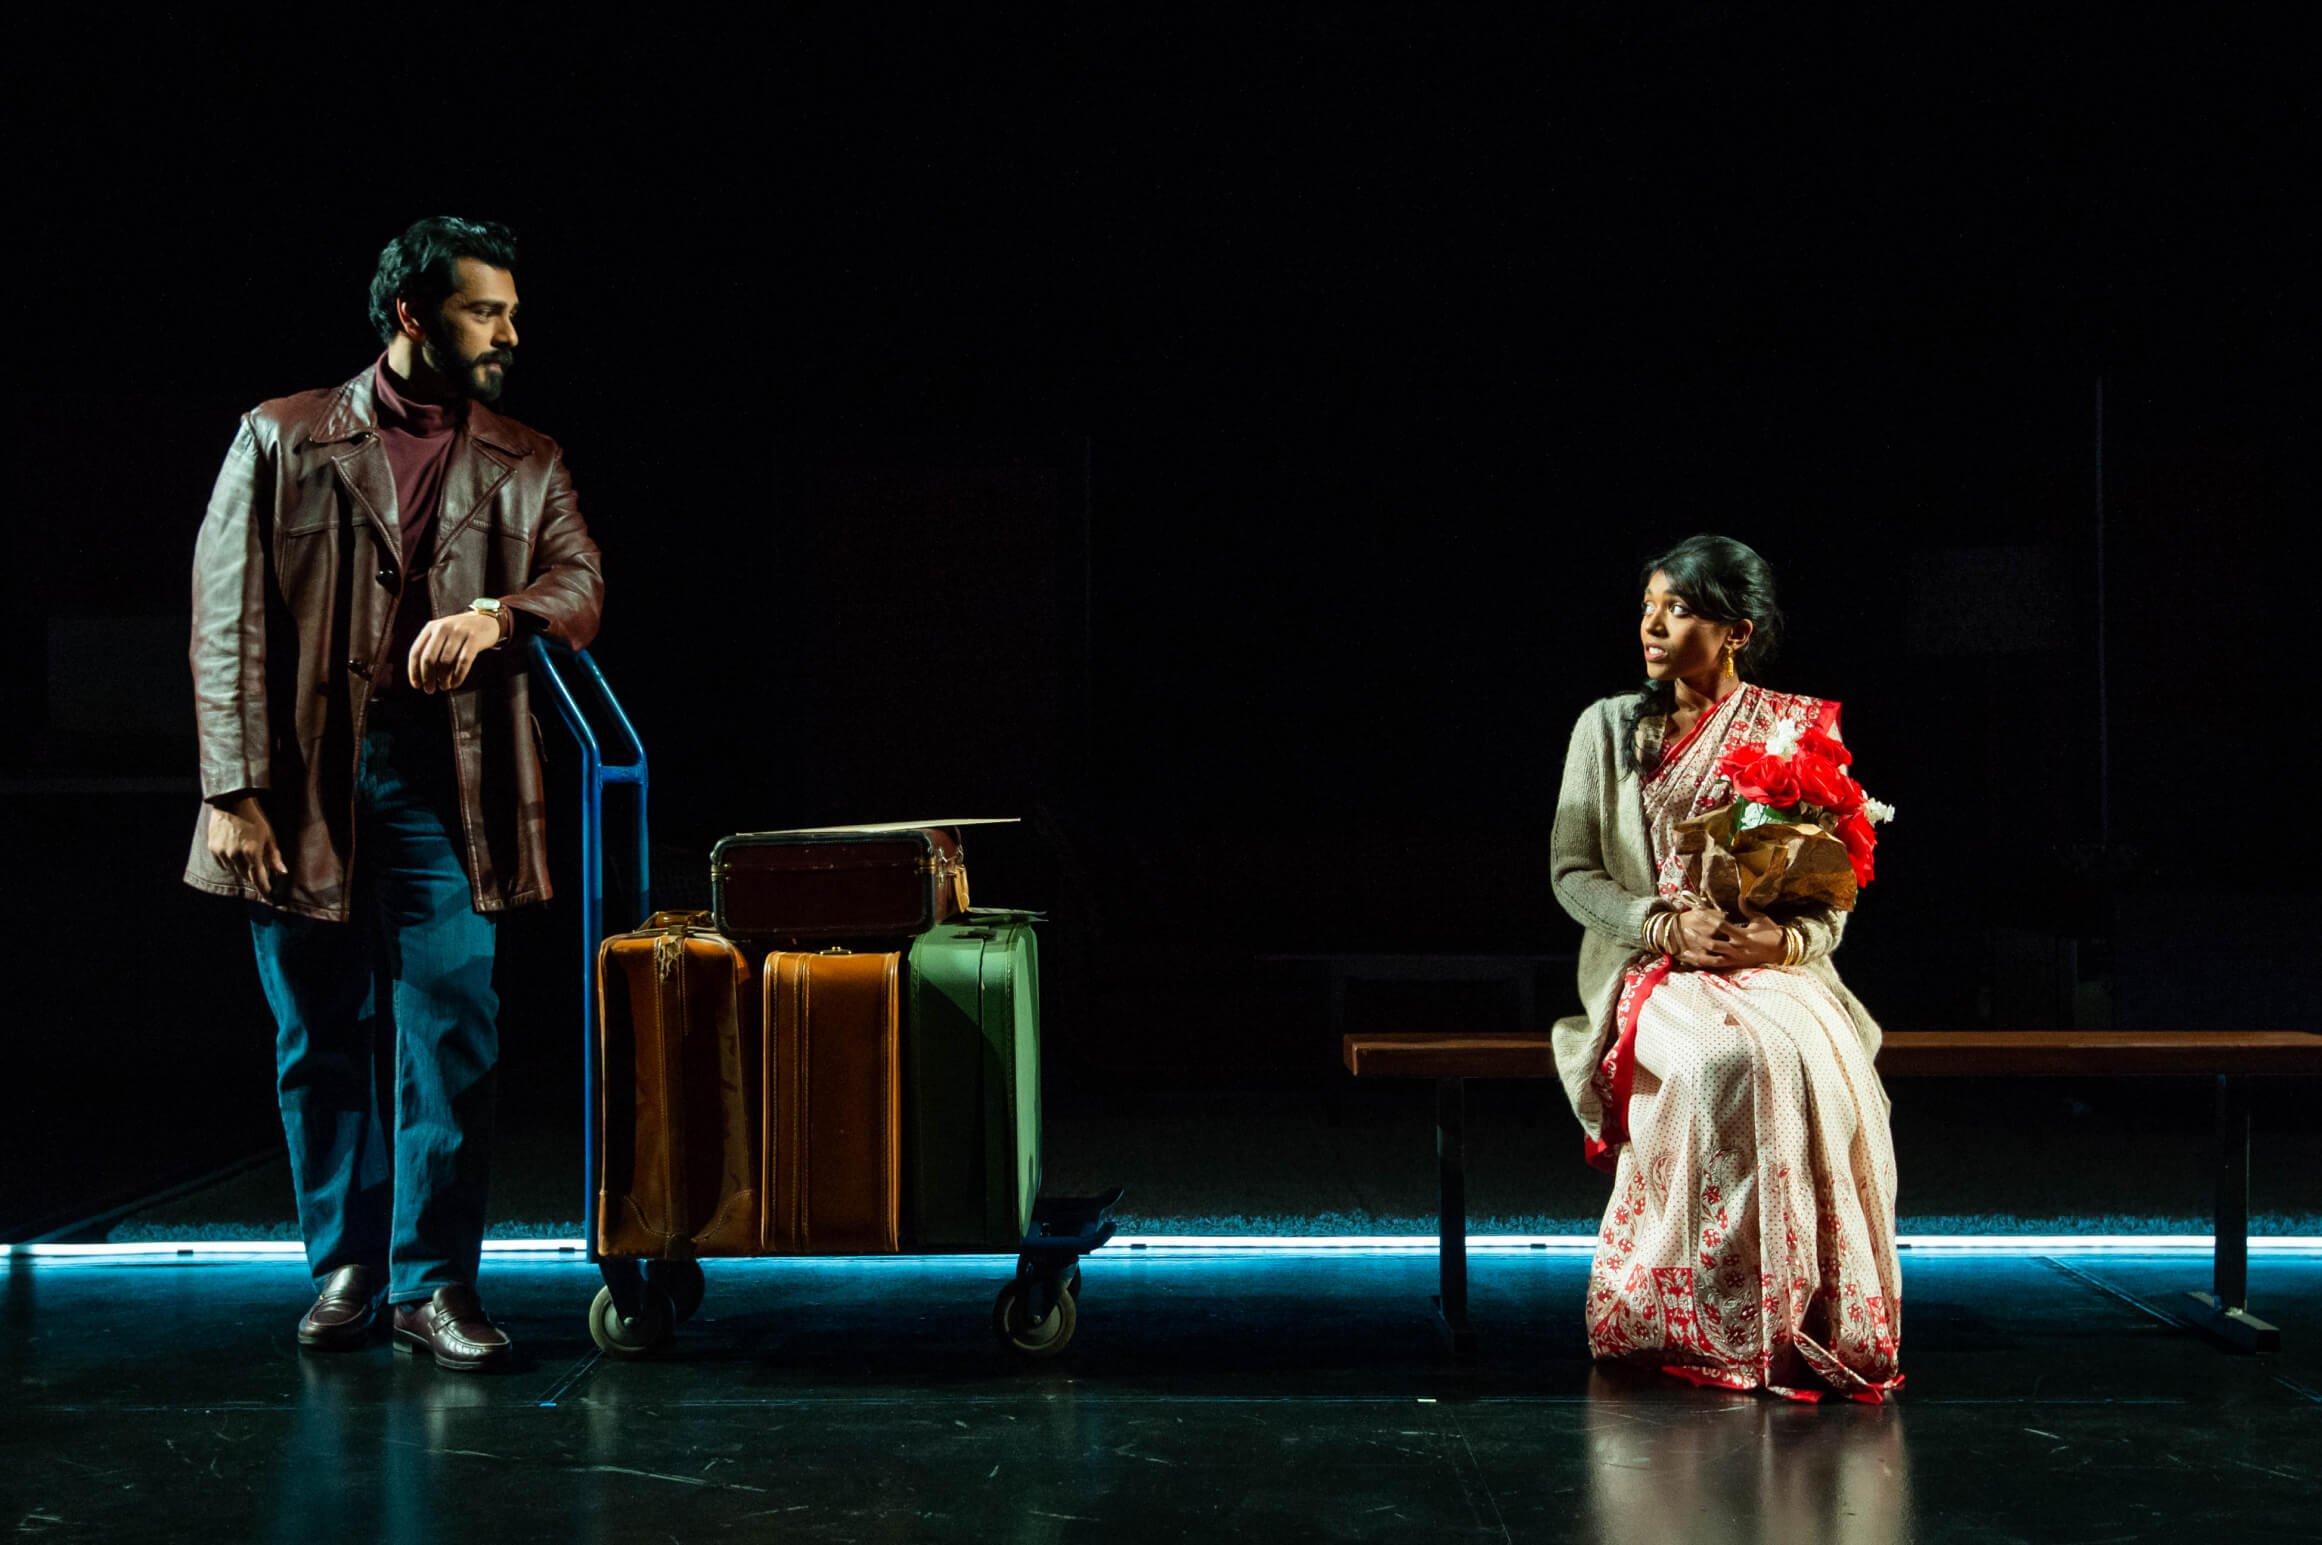  Fuad Ahmed and Mirabella Sundar Singh in New. Photo from RMTC in association with Necessary Angel Theatre Company. Photo by Dylan Hewlett 